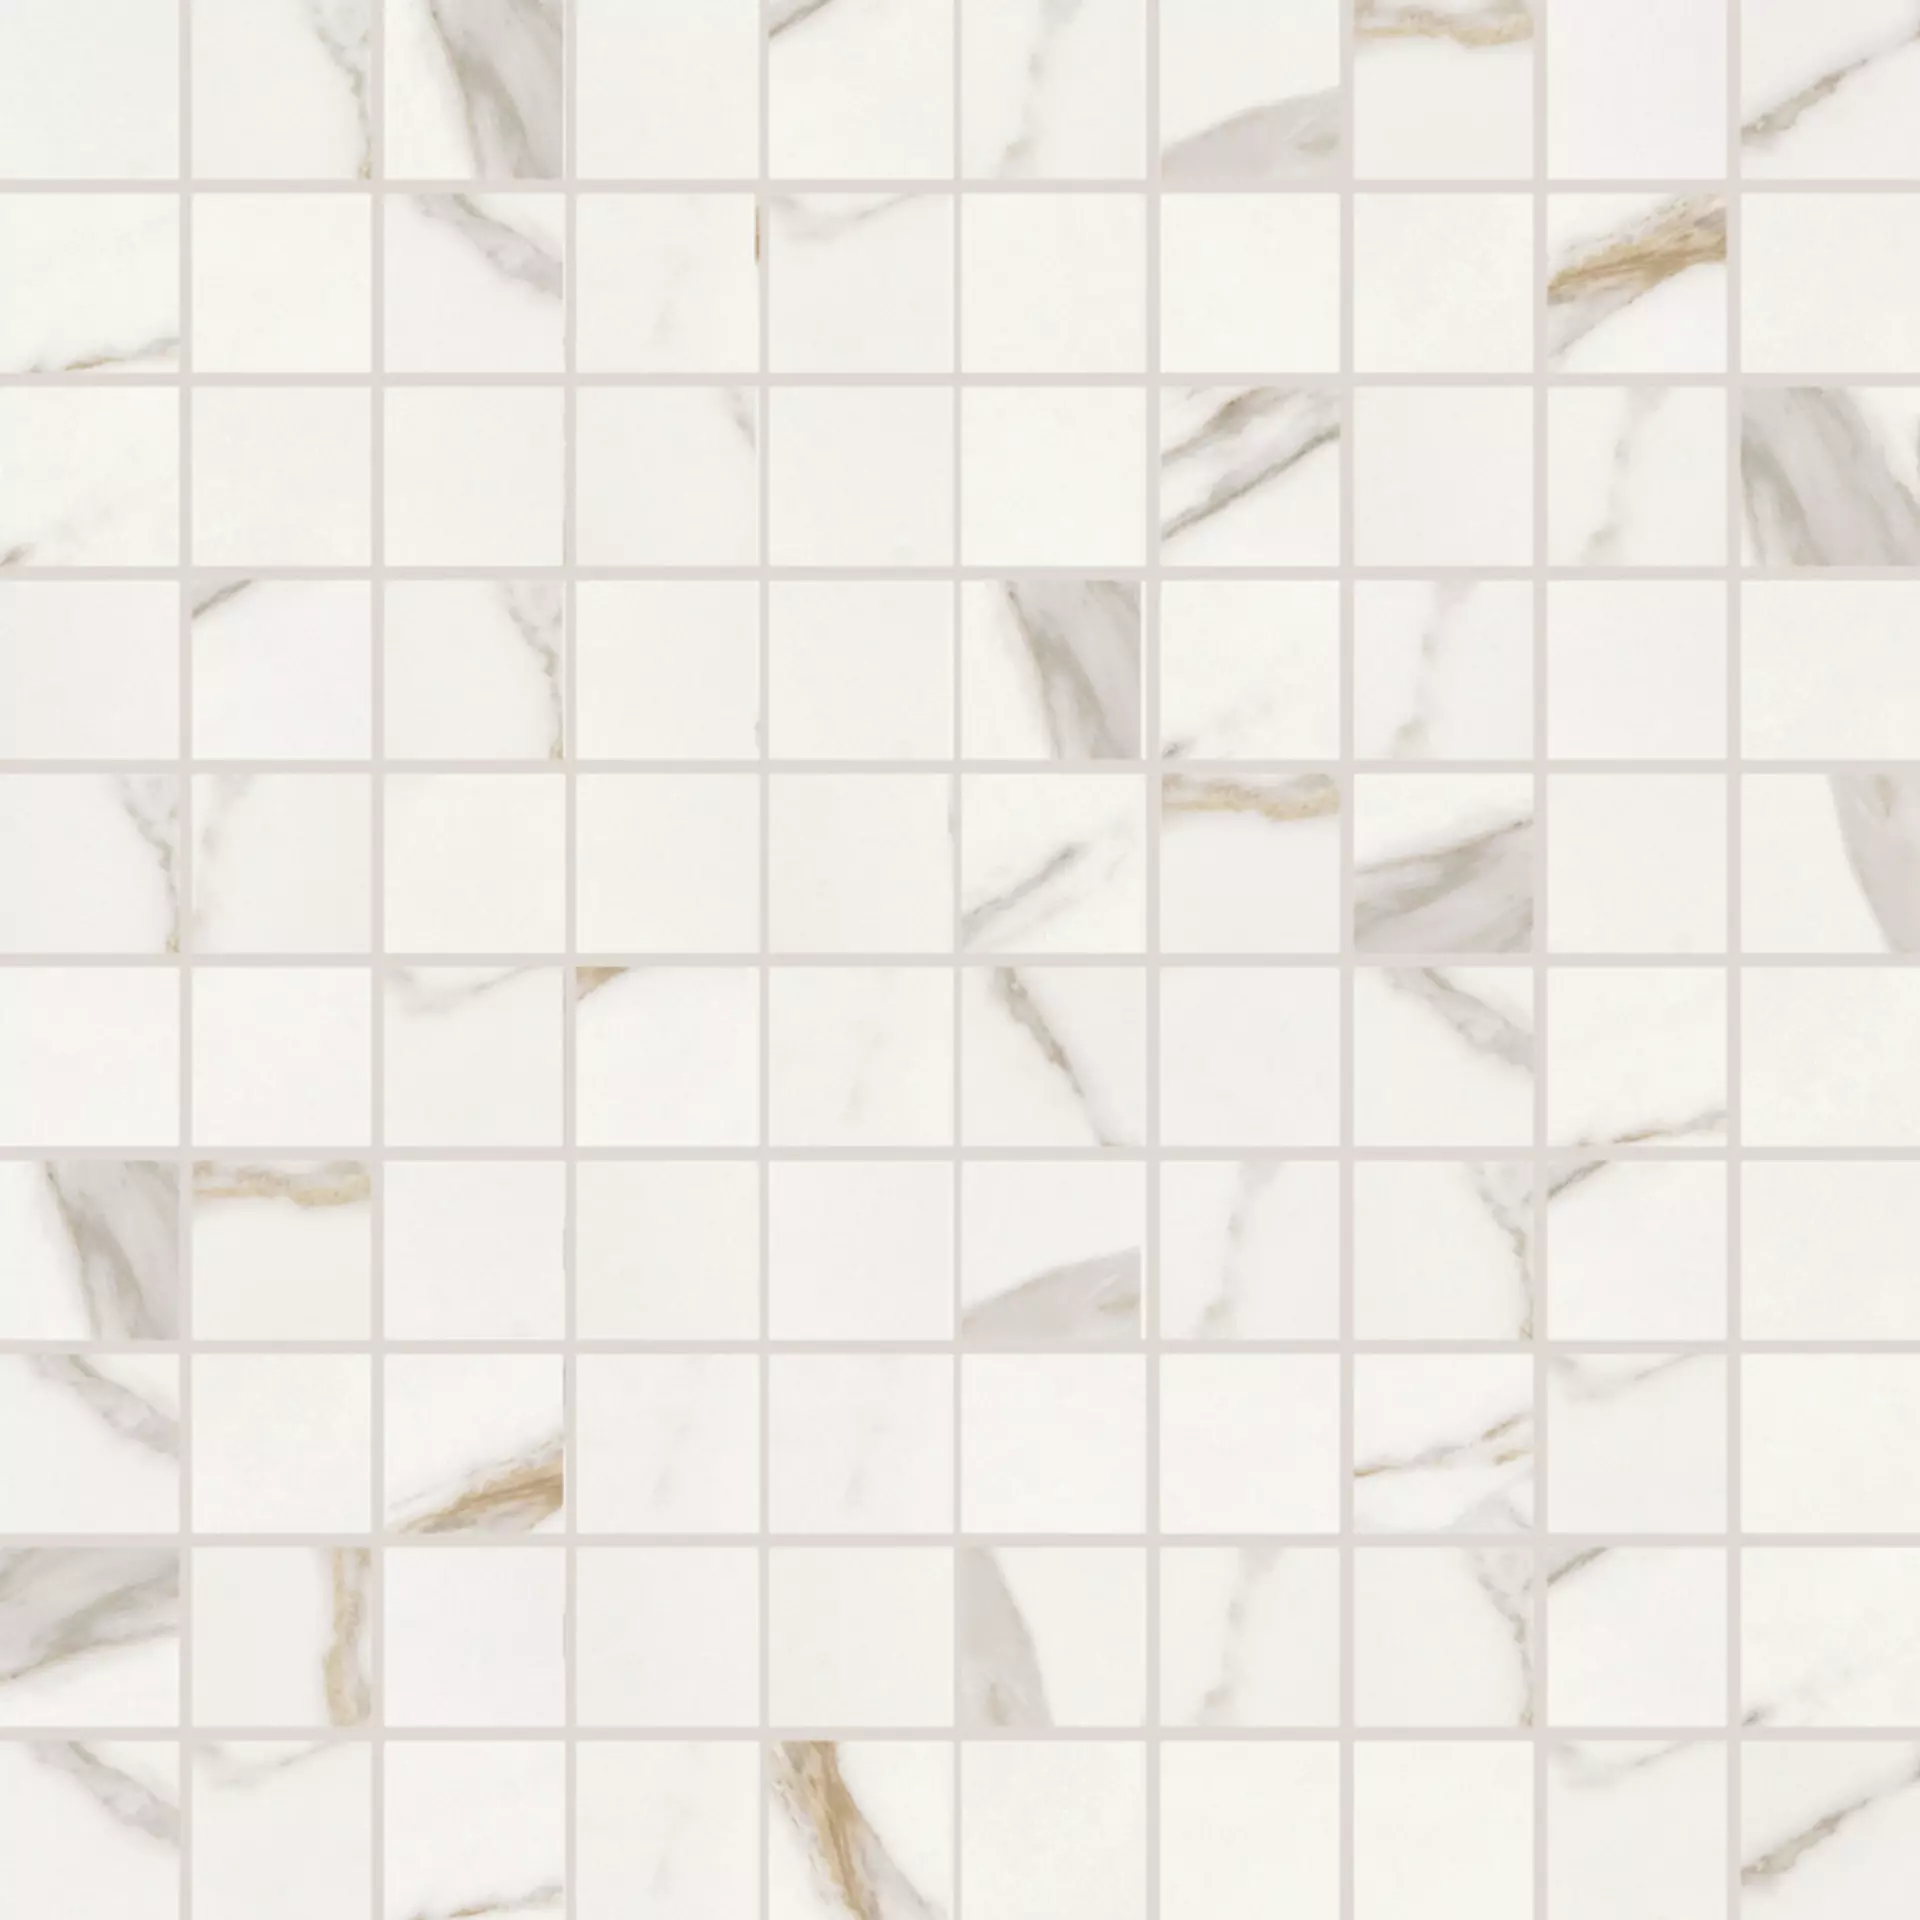 Keope Elements Lux Calacatta Gold Lappato Mosaic 41324D38 30x30cm rectified 9mm